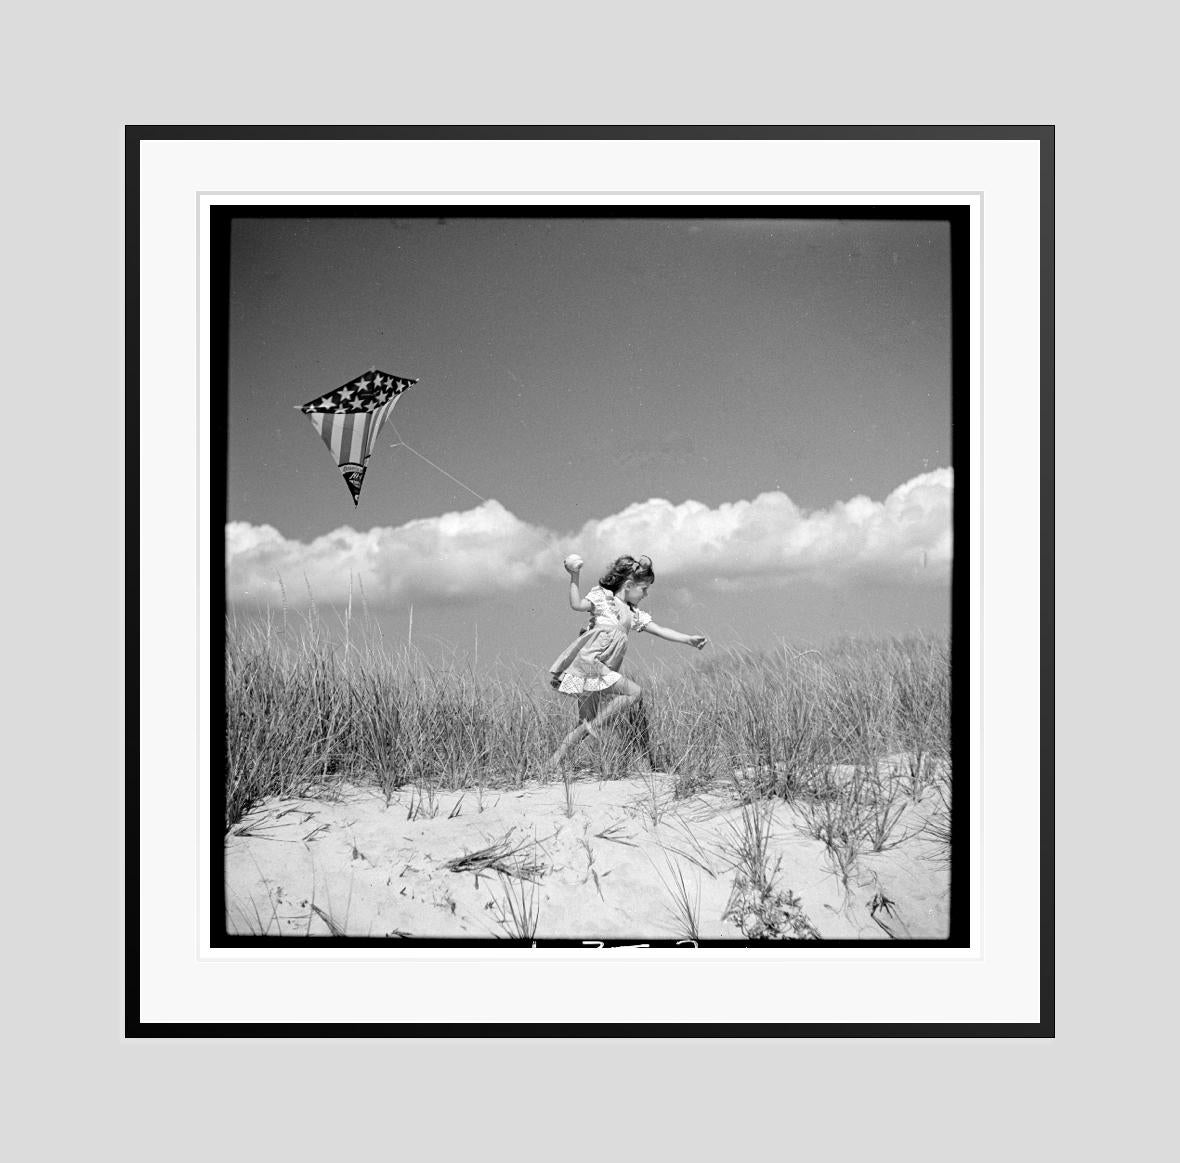 The Wind 

1944

Toni Frissell’s daugther Sidney on the beach as the Wind from A Child’s Garden of Verses, Southampton, Long Island, USA, 1944.

by Toni Frissell

30 x 30